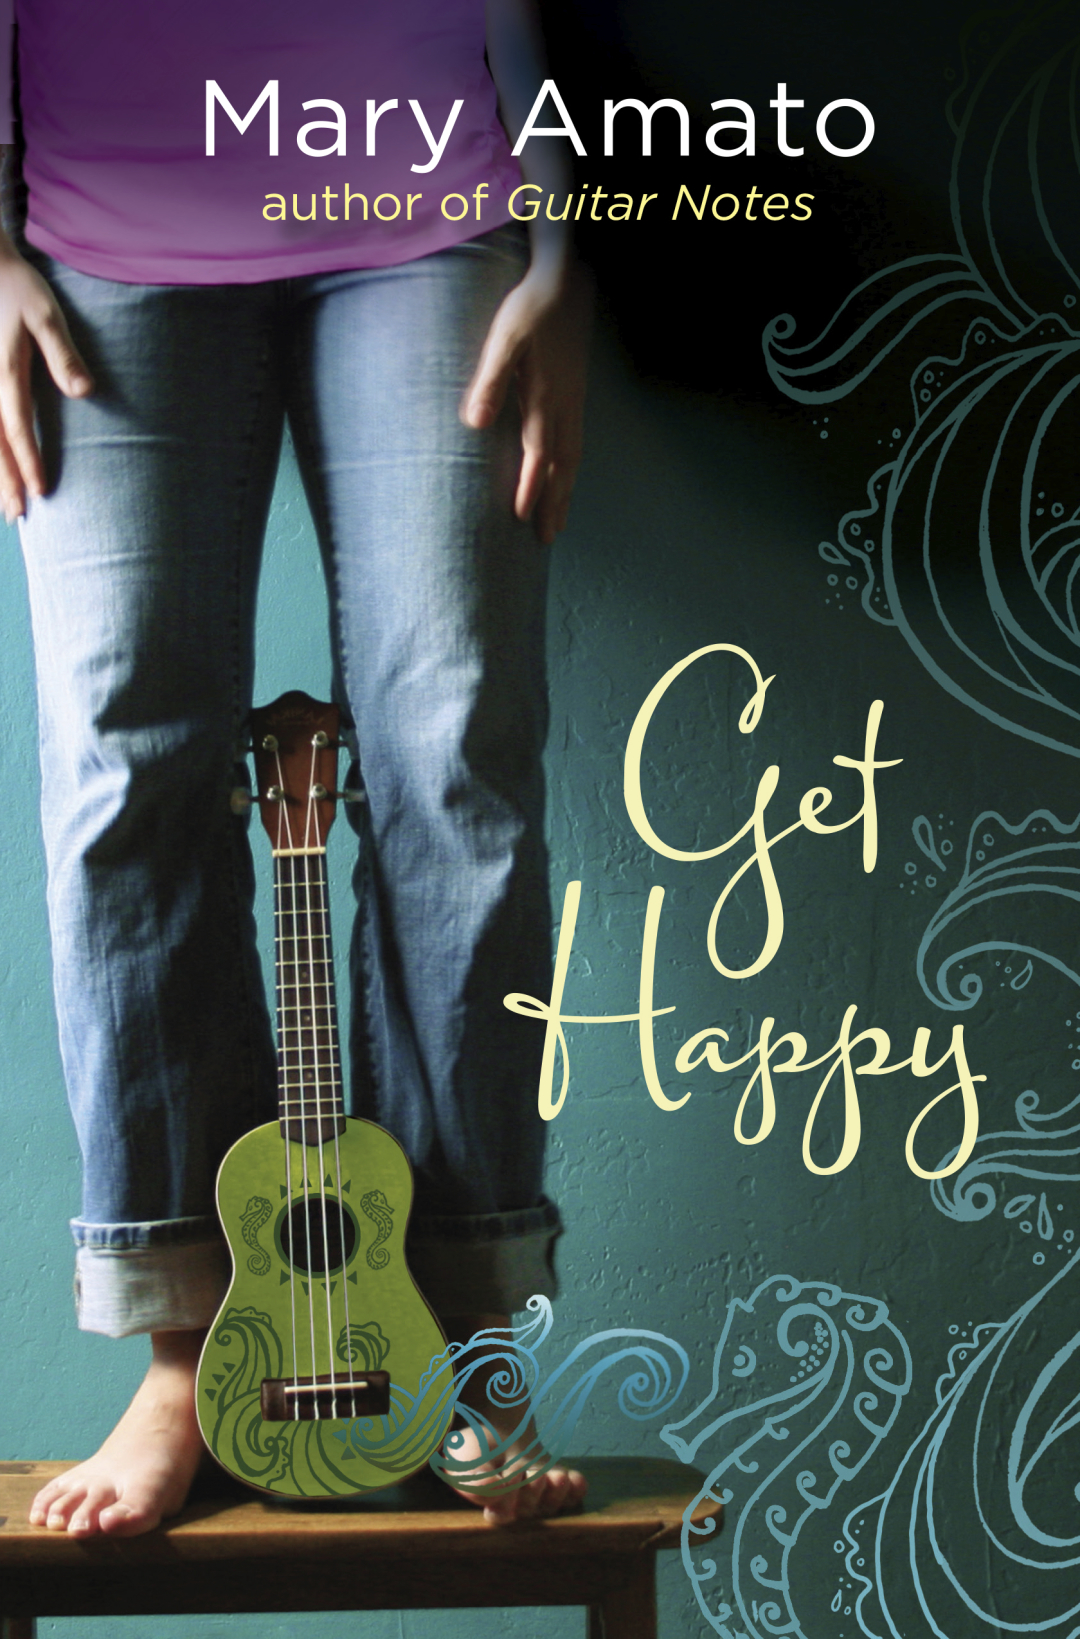 Guest Blog Post – Mary Amato ” Get Happy ”